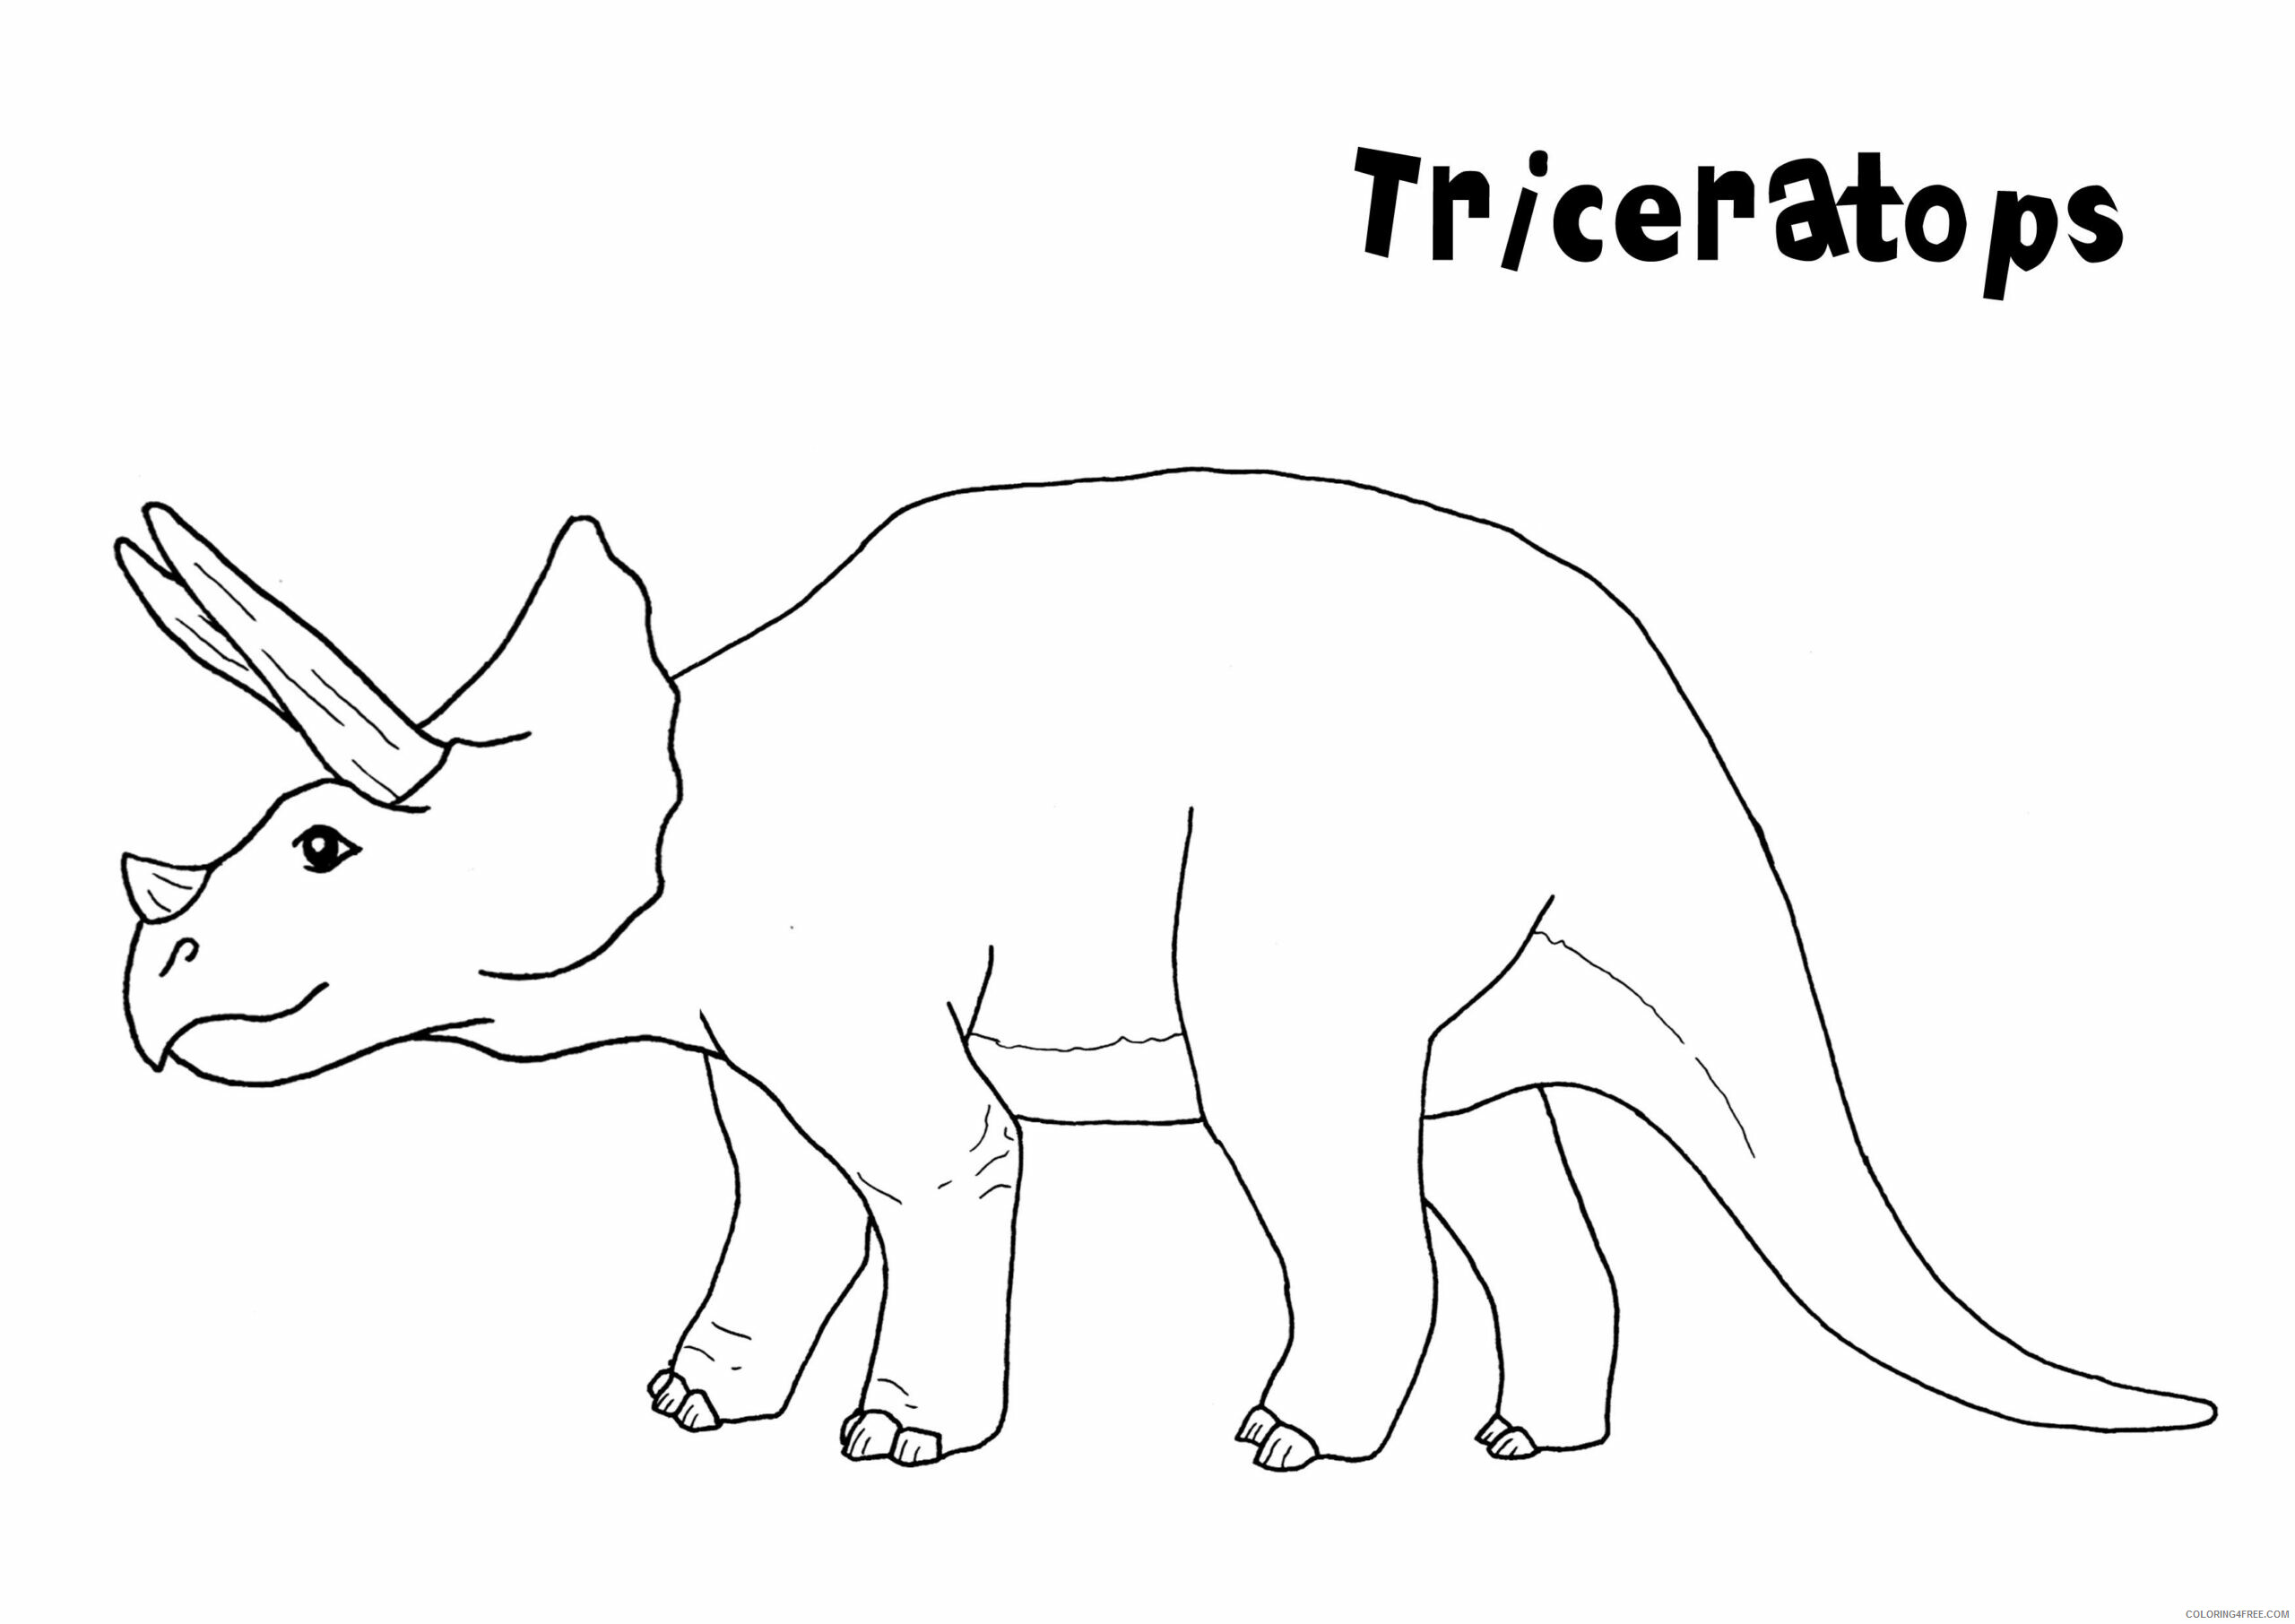 Triceratops Coloring Pages Animal Printable Sheets Triceratops For kids 2021 4841 Coloring4free